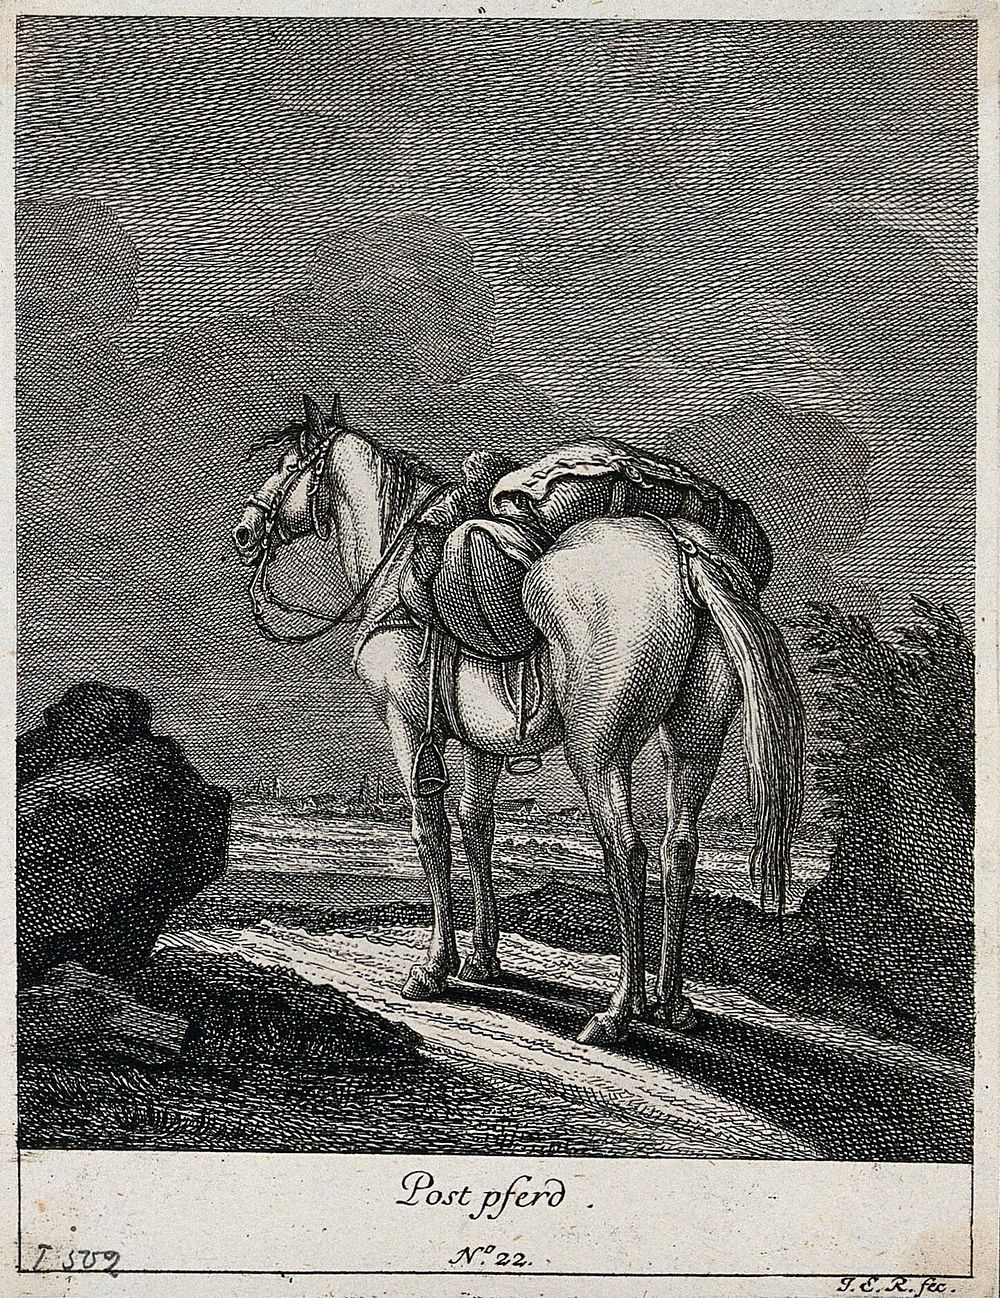 Post-horse with baggage standing on a rocky path with a village in the background. Etching by J. E. Ridinger.